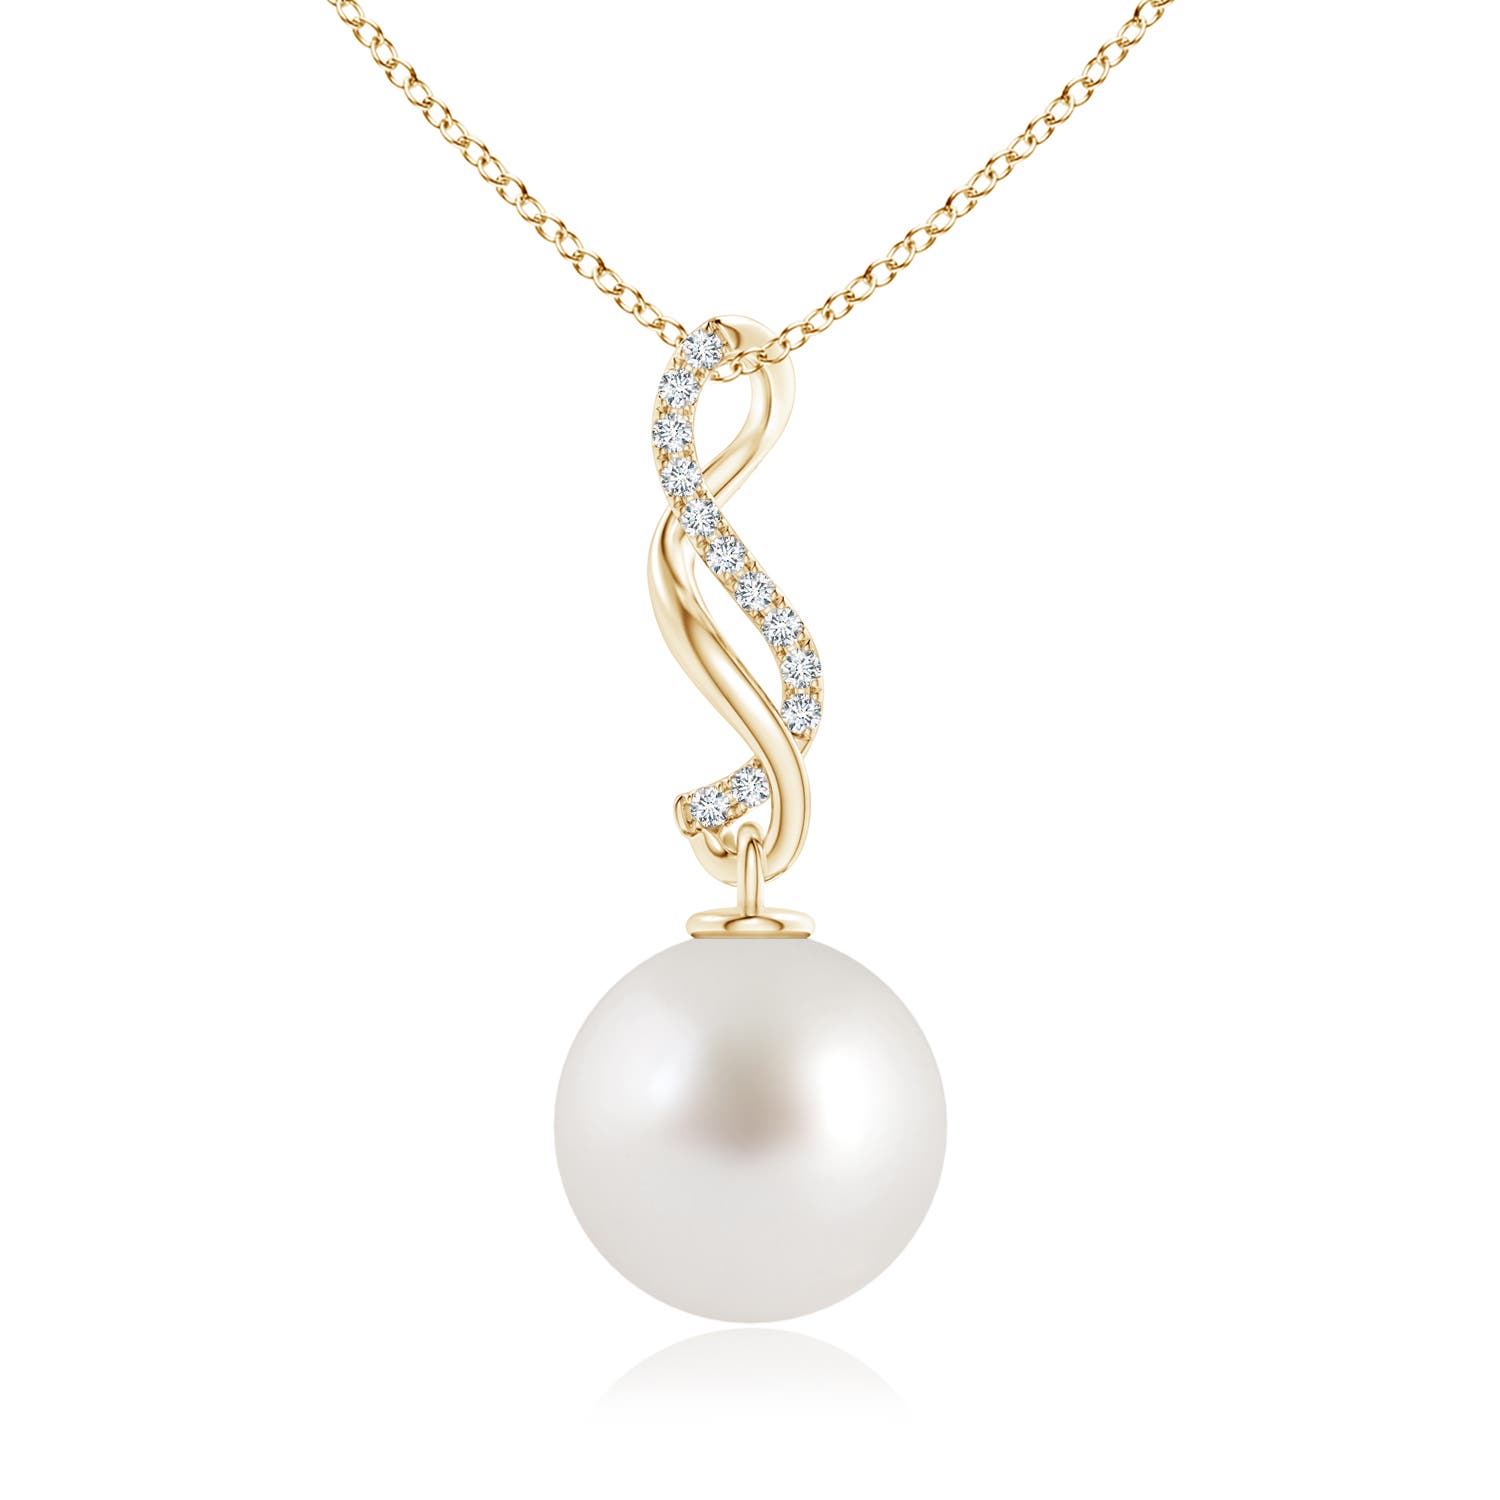 AAA - South Sea Cultured Pearl / 7.26 CT / 14 KT Yellow Gold